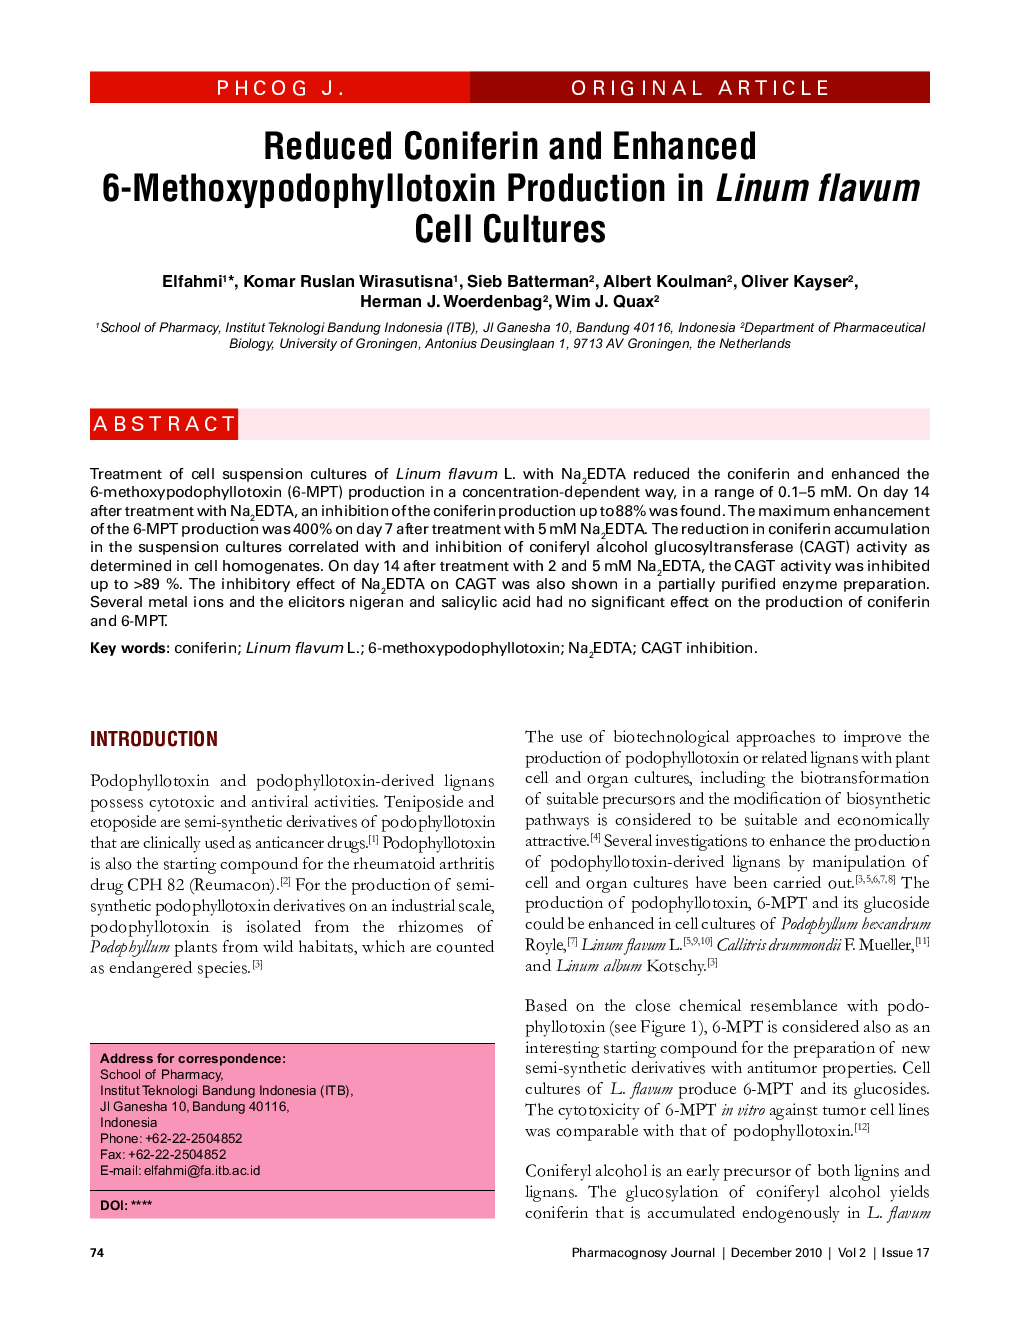 Reduced Coniferin and Enhanced 6-Methoxypodophyllotoxin Production in Linum flavum Cell Cultures